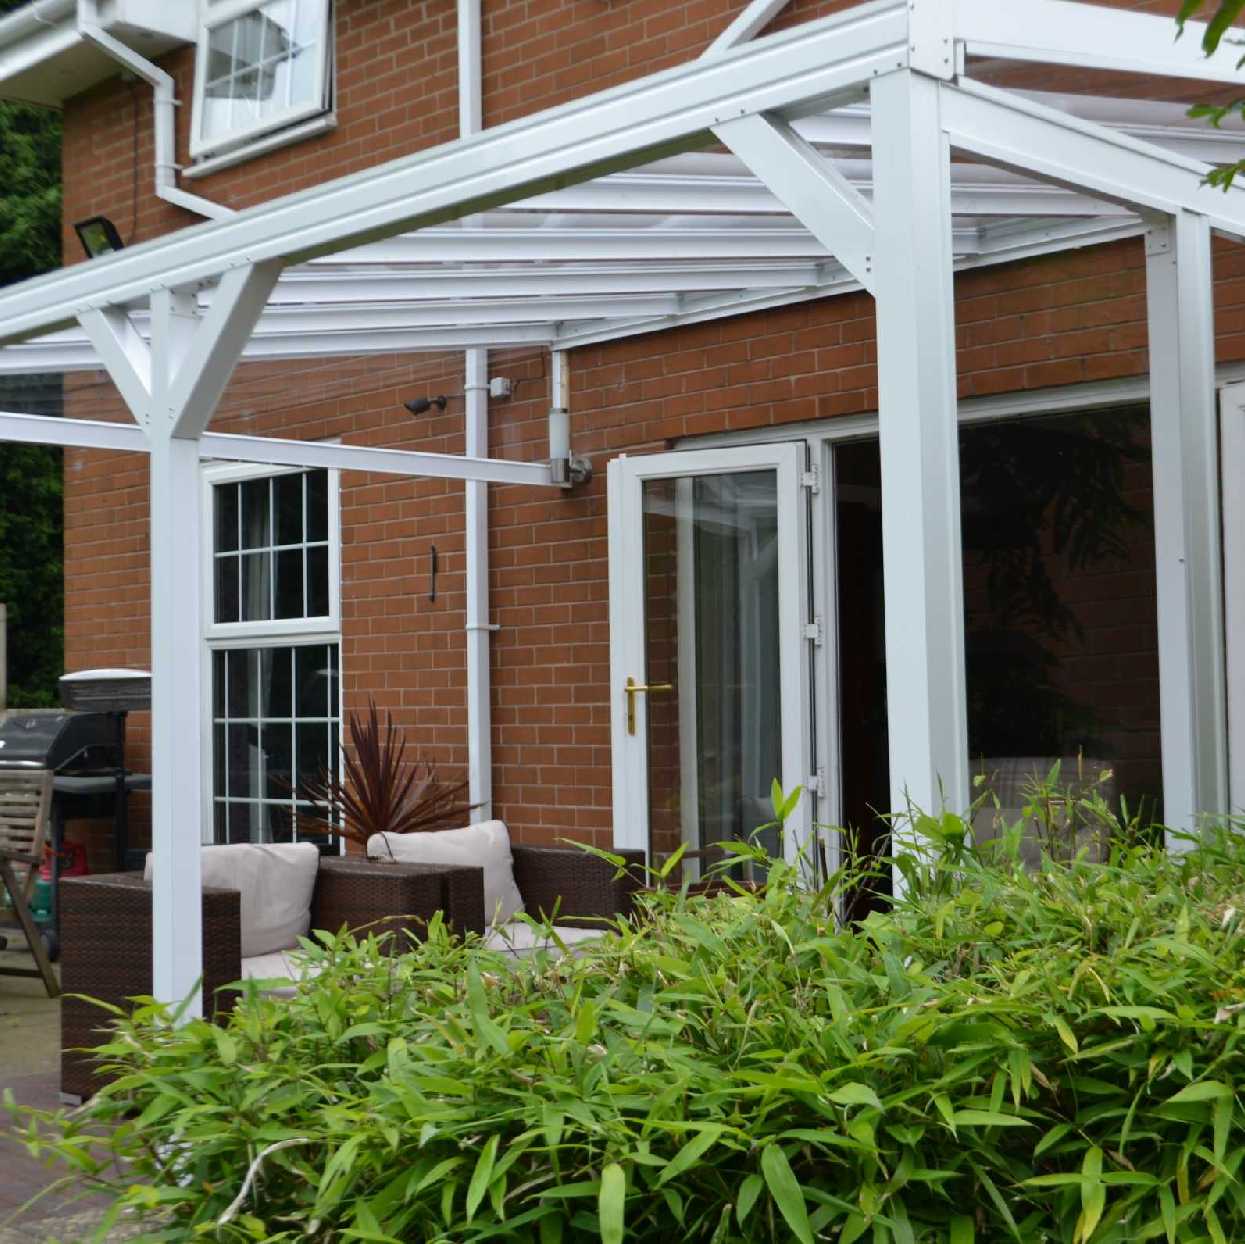 Omega Smart Lean-To Canopy, White with 6mm Glass Clear Plate Polycarbonate Glazing - 2.8m (W) x 3.0m (P), (2) Supporting Posts from Omega Build